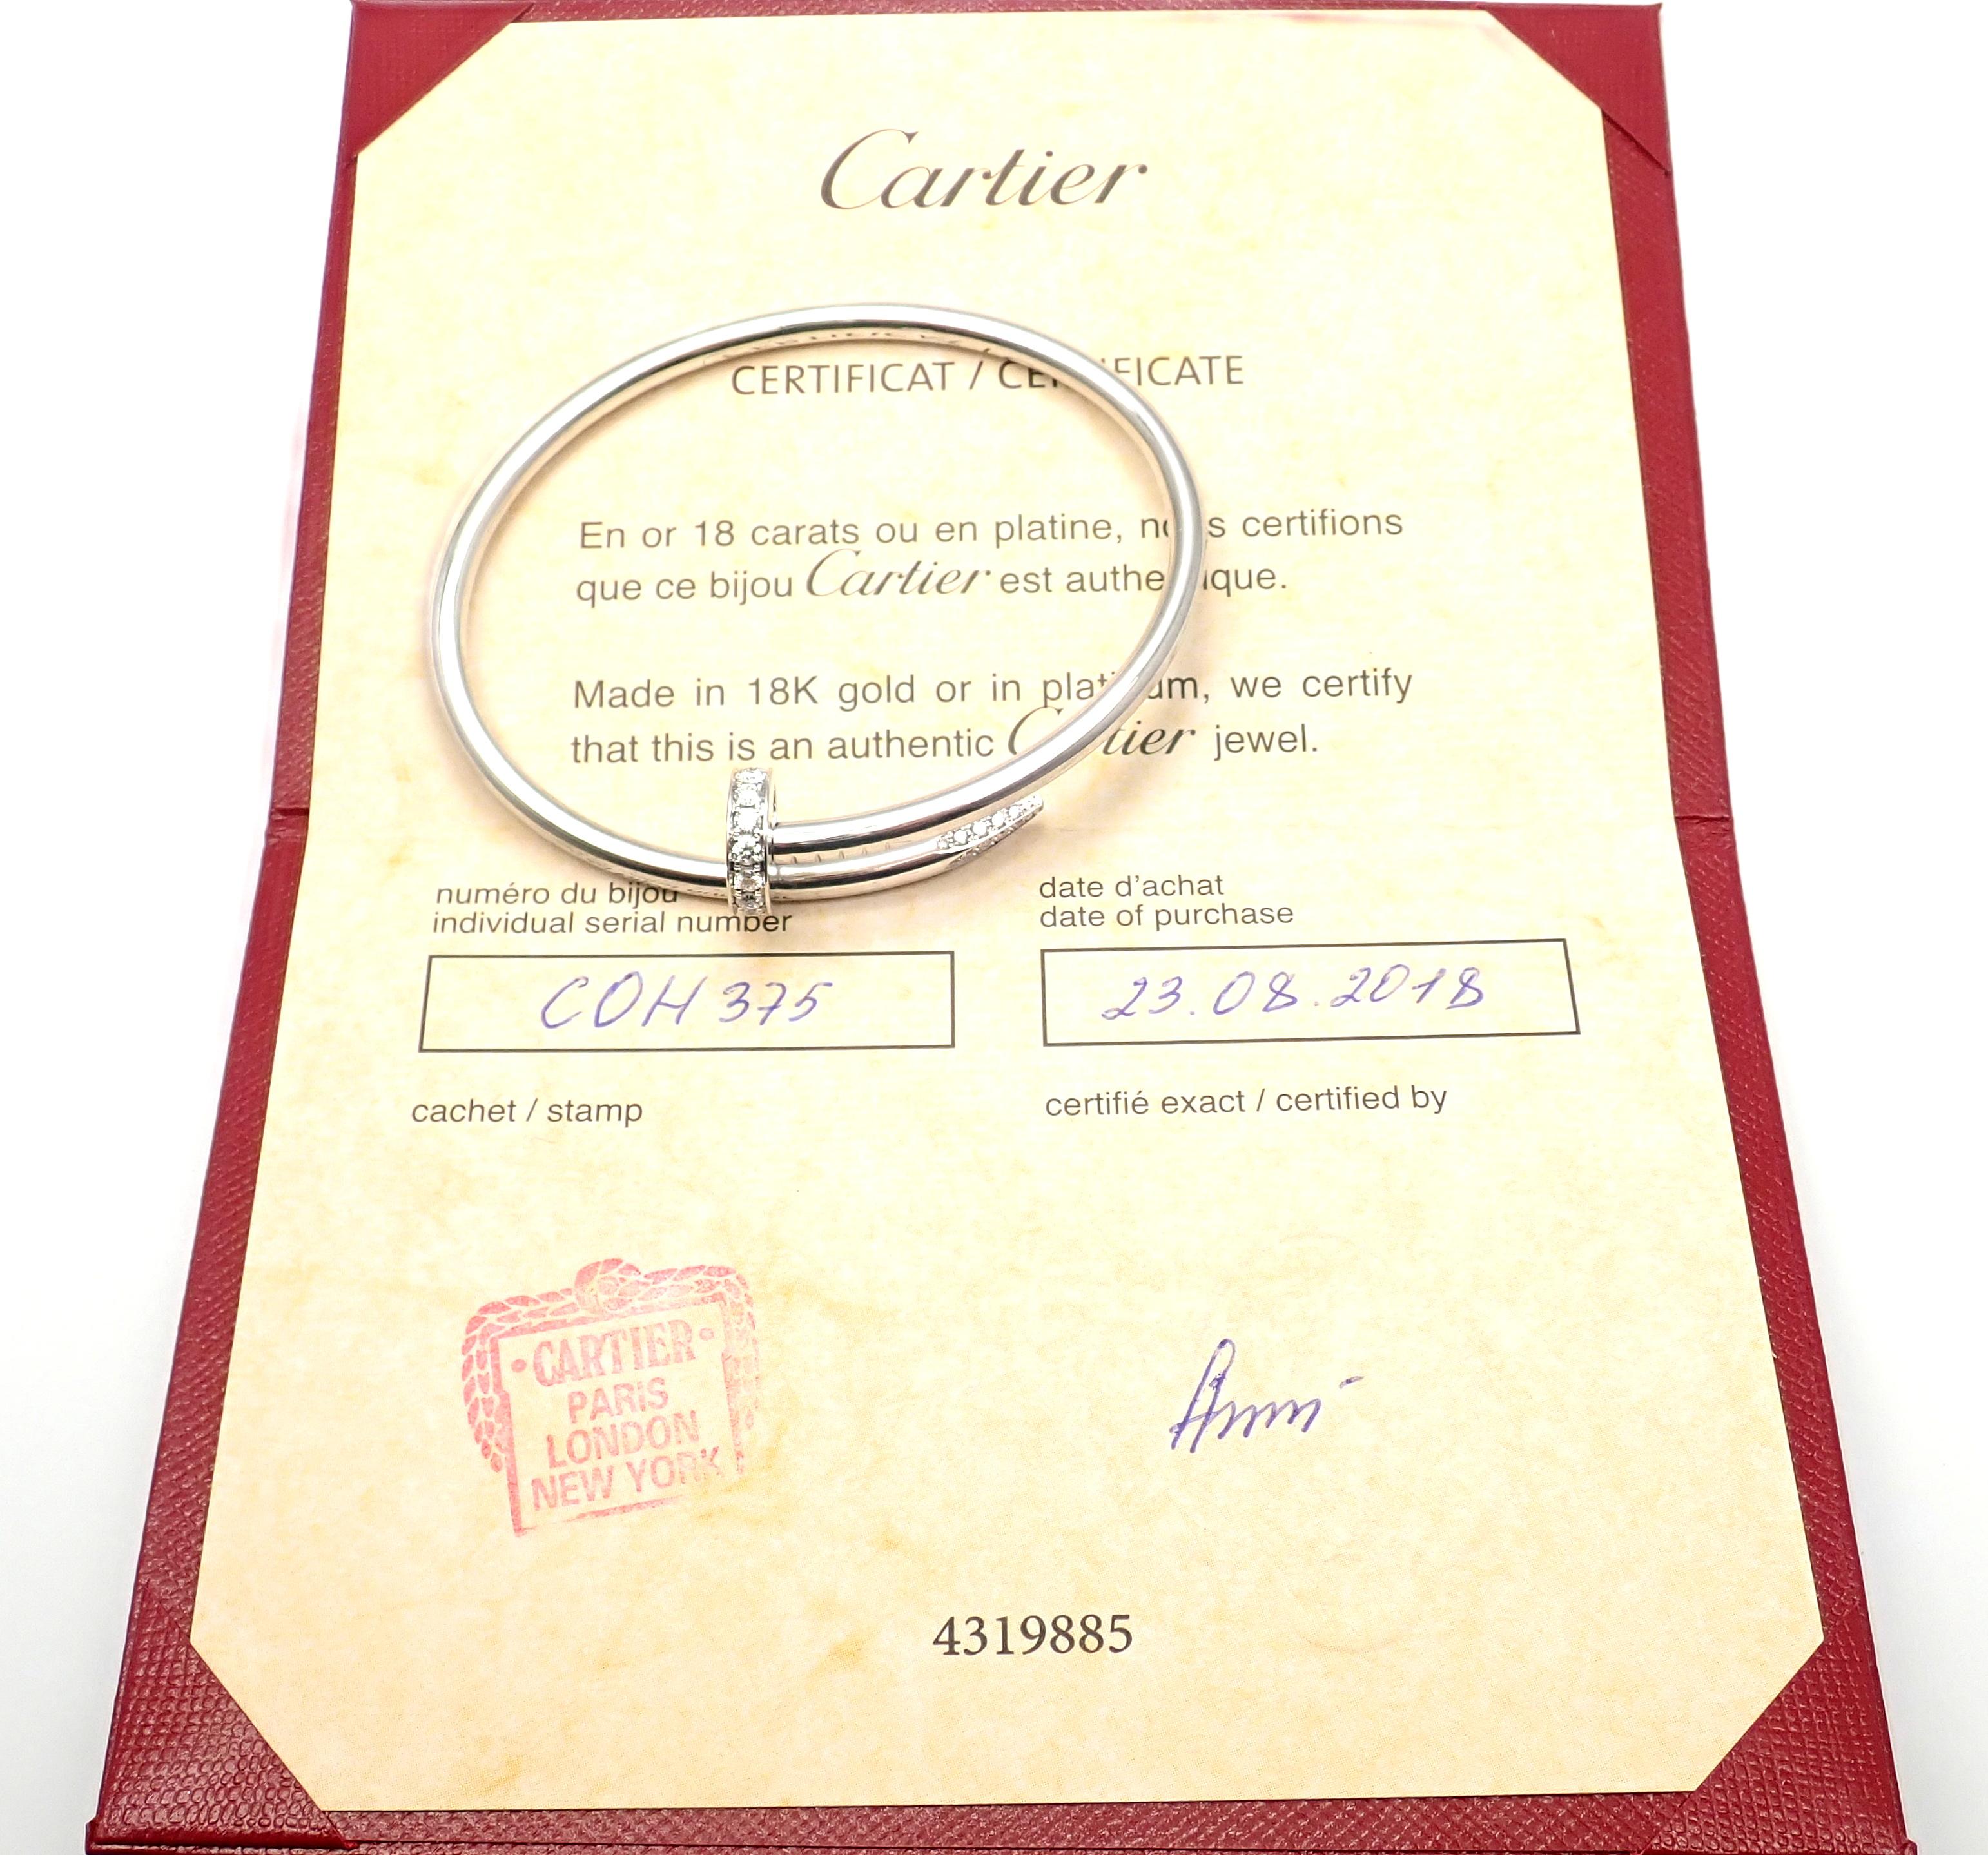 18k White Gold Diamond Juste Un Clou Nail Bangle Bracelet Size 17 by CARTIER. 
This beautiful bracelet comes with its Cartier box and Cartier certificate.
With 32 round brilliant cut diamonds E color, VVS1 clarity total weight approx.